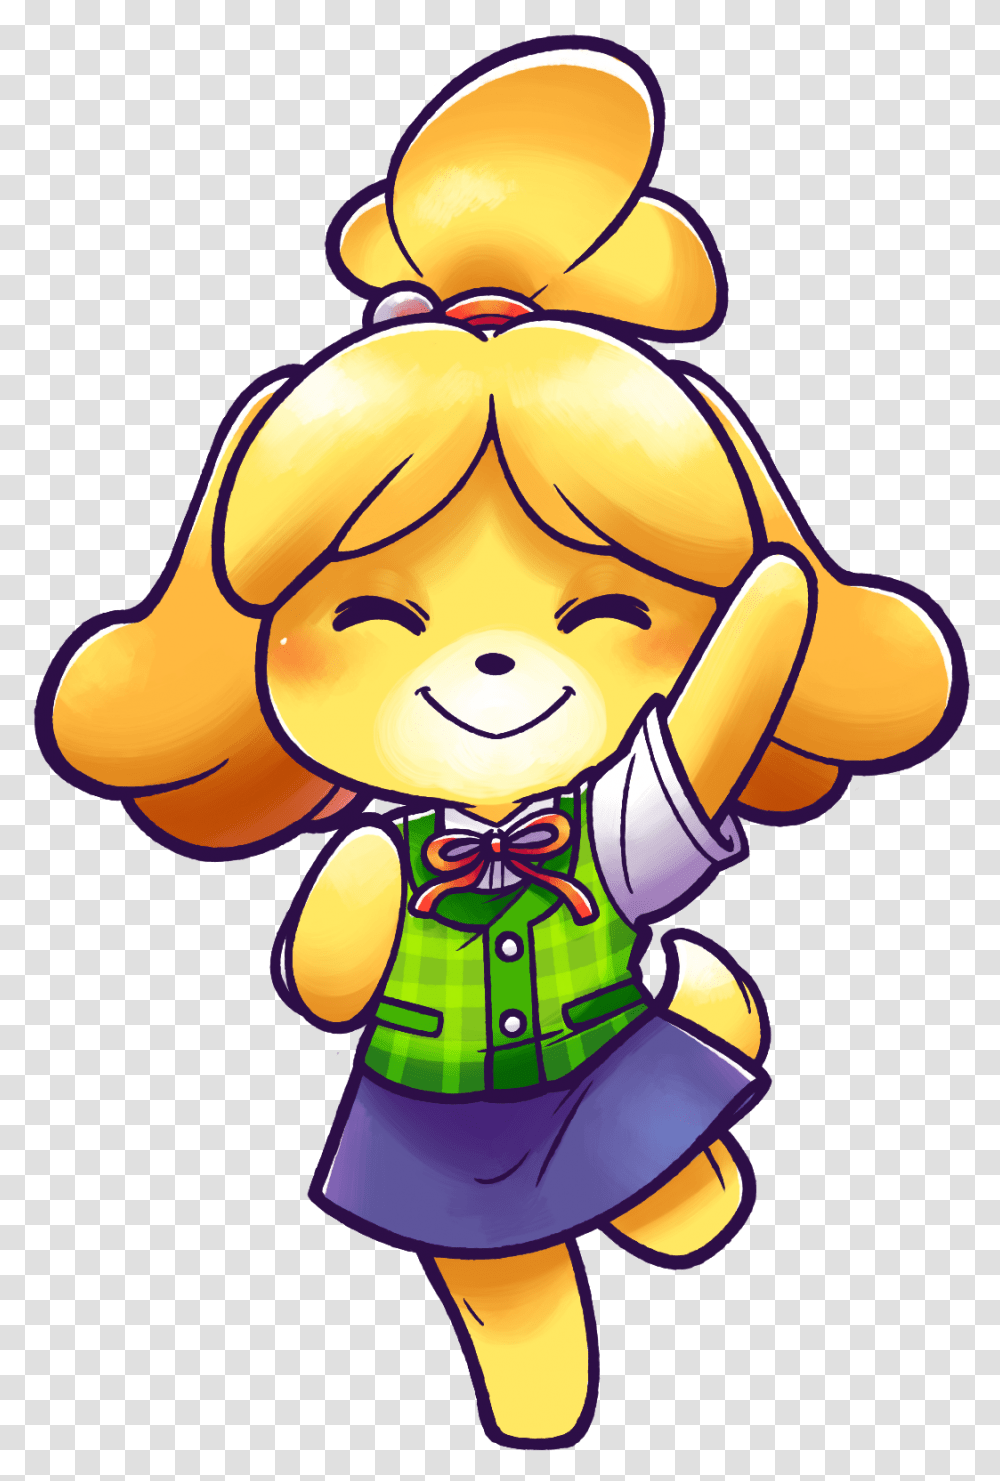 Animalcrossing Cute Isabelle Animal Crossing, Costume, Toy, Sweets, Food Transparent Png